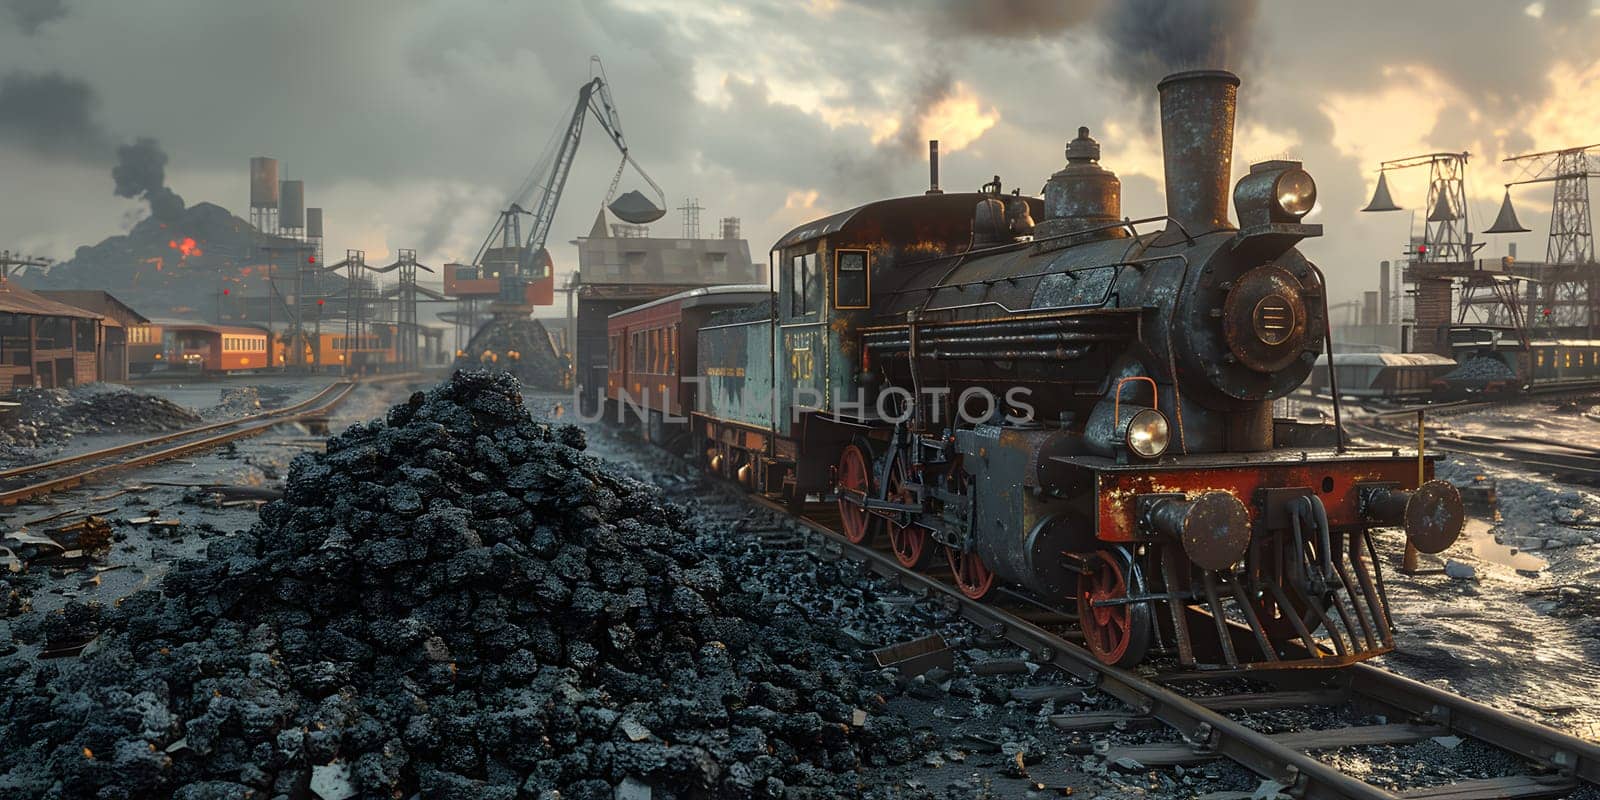 A steam train chugs along the tracks near a pile of coal, emitting clouds of pollution into the sky. The industrial landscape contrasts with the cityscape of buildings and asphalt roads